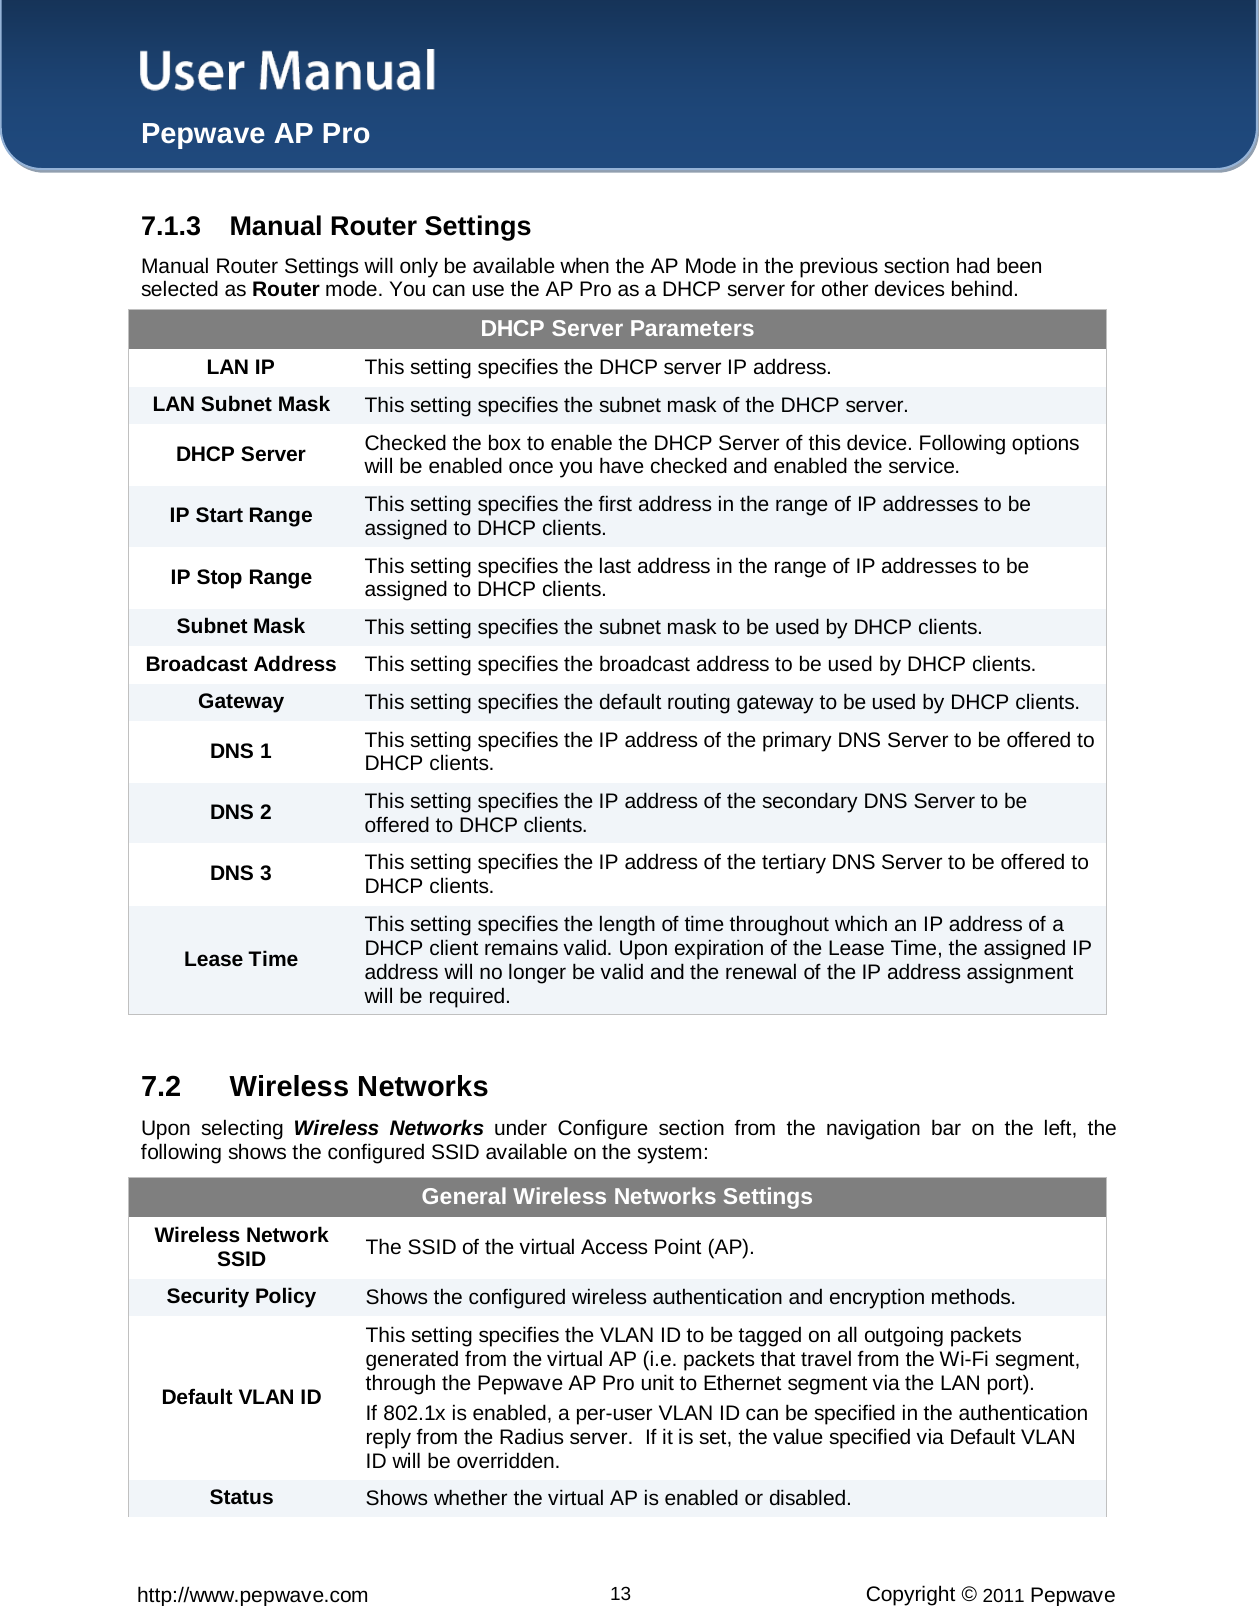 User Manual  Pepwave AP Pro http://www.pepwave.com 13 Copyright © 2011 Pepwave  7.1.3  Manual Router Settings Manual Router Settings will only be available when the AP Mode in the previous section had been selected as Router mode. You can use the AP Pro as a DHCP server for other devices behind. DHCP Server Parameters LAN IP This setting specifies the DHCP server IP address. LAN Subnet Mask This setting specifies the subnet mask of the DHCP server. DHCP Server Checked the box to enable the DHCP Server of this device. Following options will be enabled once you have checked and enabled the service. IP Start Range This setting specifies the first address in the range of IP addresses to be assigned to DHCP clients. IP Stop Range This setting specifies the last address in the range of IP addresses to be assigned to DHCP clients. Subnet Mask This setting specifies the subnet mask to be used by DHCP clients. Broadcast Address This setting specifies the broadcast address to be used by DHCP clients. Gateway This setting specifies the default routing gateway to be used by DHCP clients. DNS 1 This setting specifies the IP address of the primary DNS Server to be offered to DHCP clients. DNS 2 This setting specifies the IP address of the secondary DNS Server to be offered to DHCP clients. DNS 3 This setting specifies the IP address of the tertiary DNS Server to be offered to DHCP clients. Lease Time This setting specifies the length of time throughout which an IP address of a DHCP client remains valid. Upon expiration of the Lease Time, the assigned IP address will no longer be valid and the renewal of the IP address assignment will be required.  7.2 Wireless Networks Upon selecting Wireless Networks under Configure section from the navigation bar on the left, the following shows the configured SSID available on the system: General Wireless Networks Settings Wireless Network SSID  The SSID of the virtual Access Point (AP). Security Policy Shows the configured wireless authentication and encryption methods. Default VLAN ID This setting specifies the VLAN ID to be tagged on all outgoing packets generated from the virtual AP (i.e. packets that travel from the Wi-Fi segment, through the Pepwave AP Pro unit to Ethernet segment via the LAN port).   If 802.1x is enabled, a per-user VLAN ID can be specified in the authentication reply from the Radius server.  If it is set, the value specified via Default VLAN ID will be overridden. Status  Shows whether the virtual AP is enabled or disabled. 